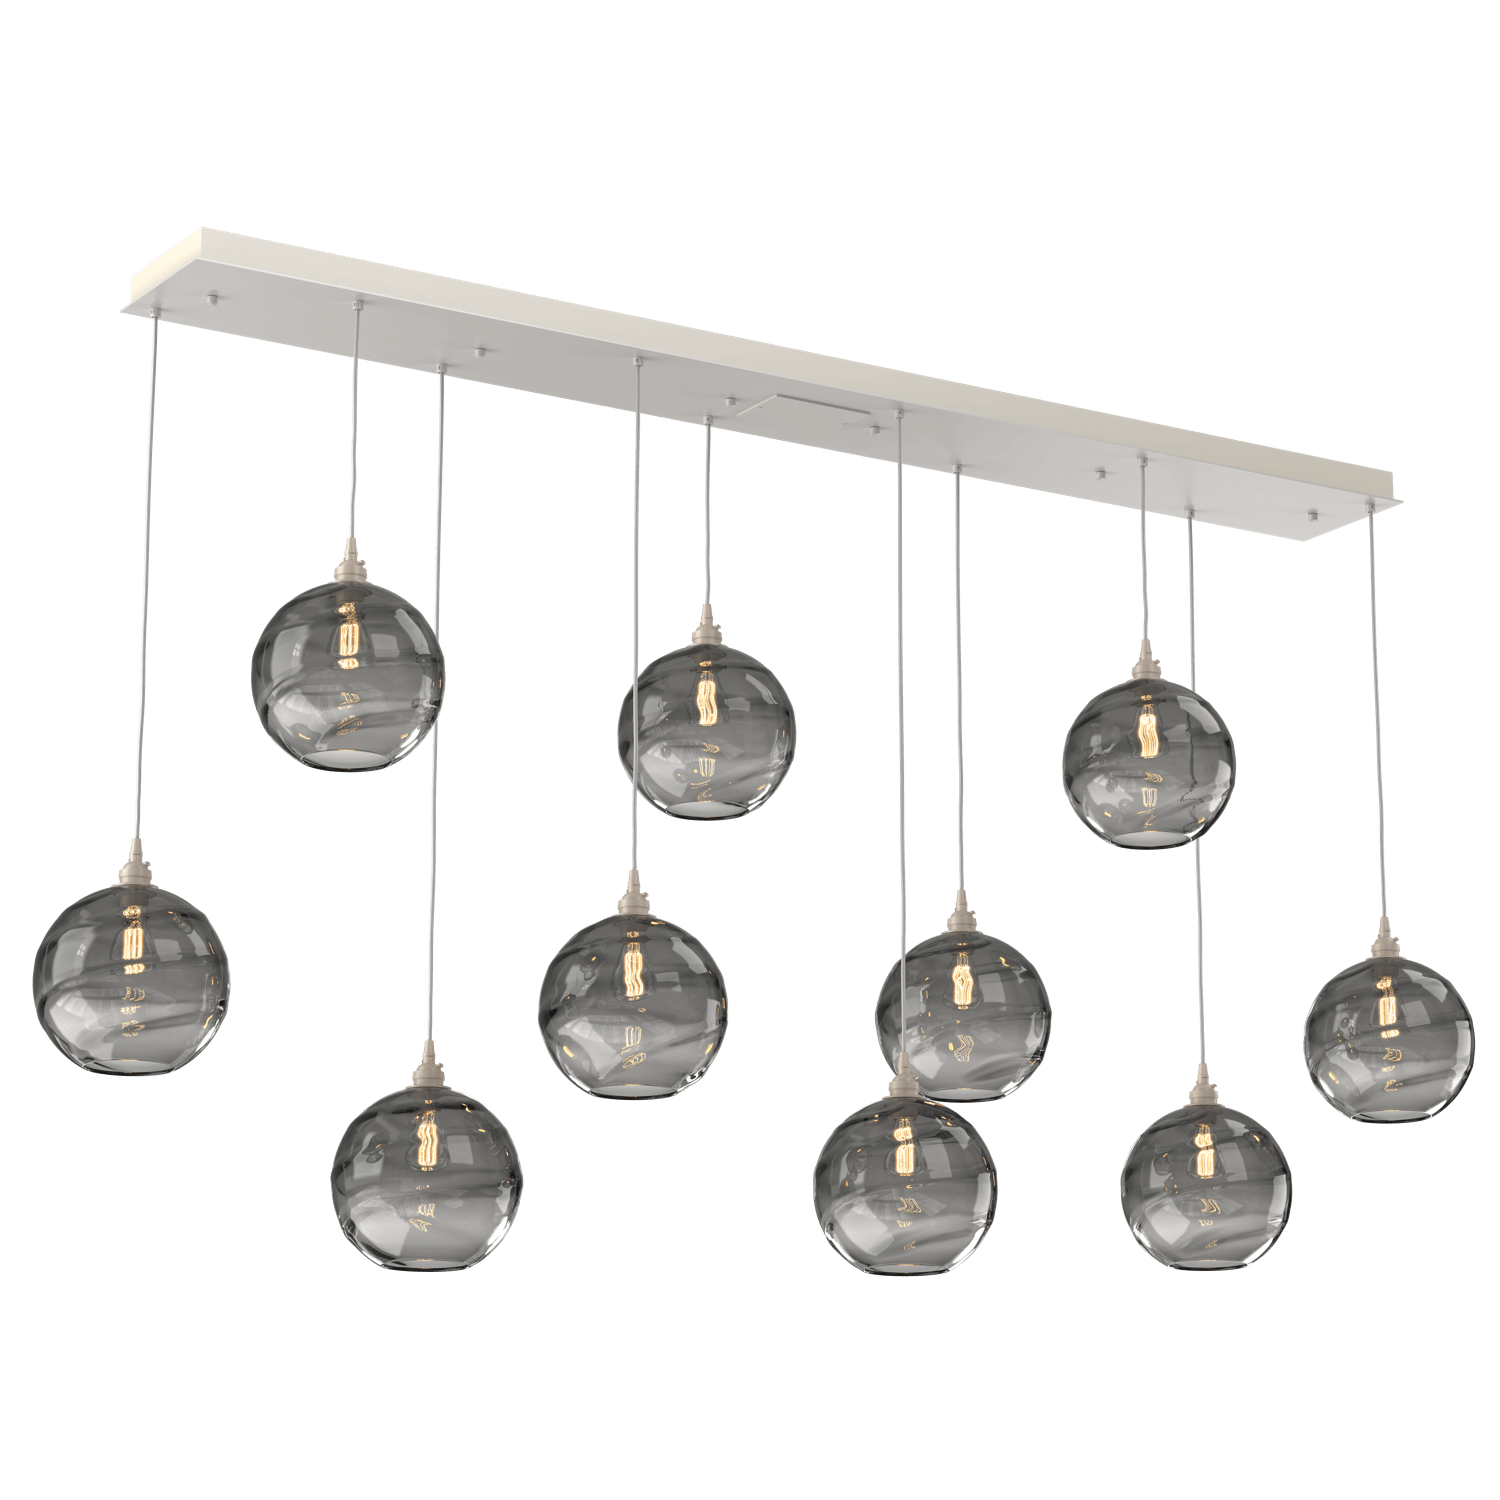 PLB0047-10-BS-OS-Hammerton-Studio-Optic-Blown-Glass-Terra-10-light-linear-pendant-chandelier-with-metallic-beige-silver-finish-and-optic-smoke-blown-glass-shades-and-incandescent-lamping